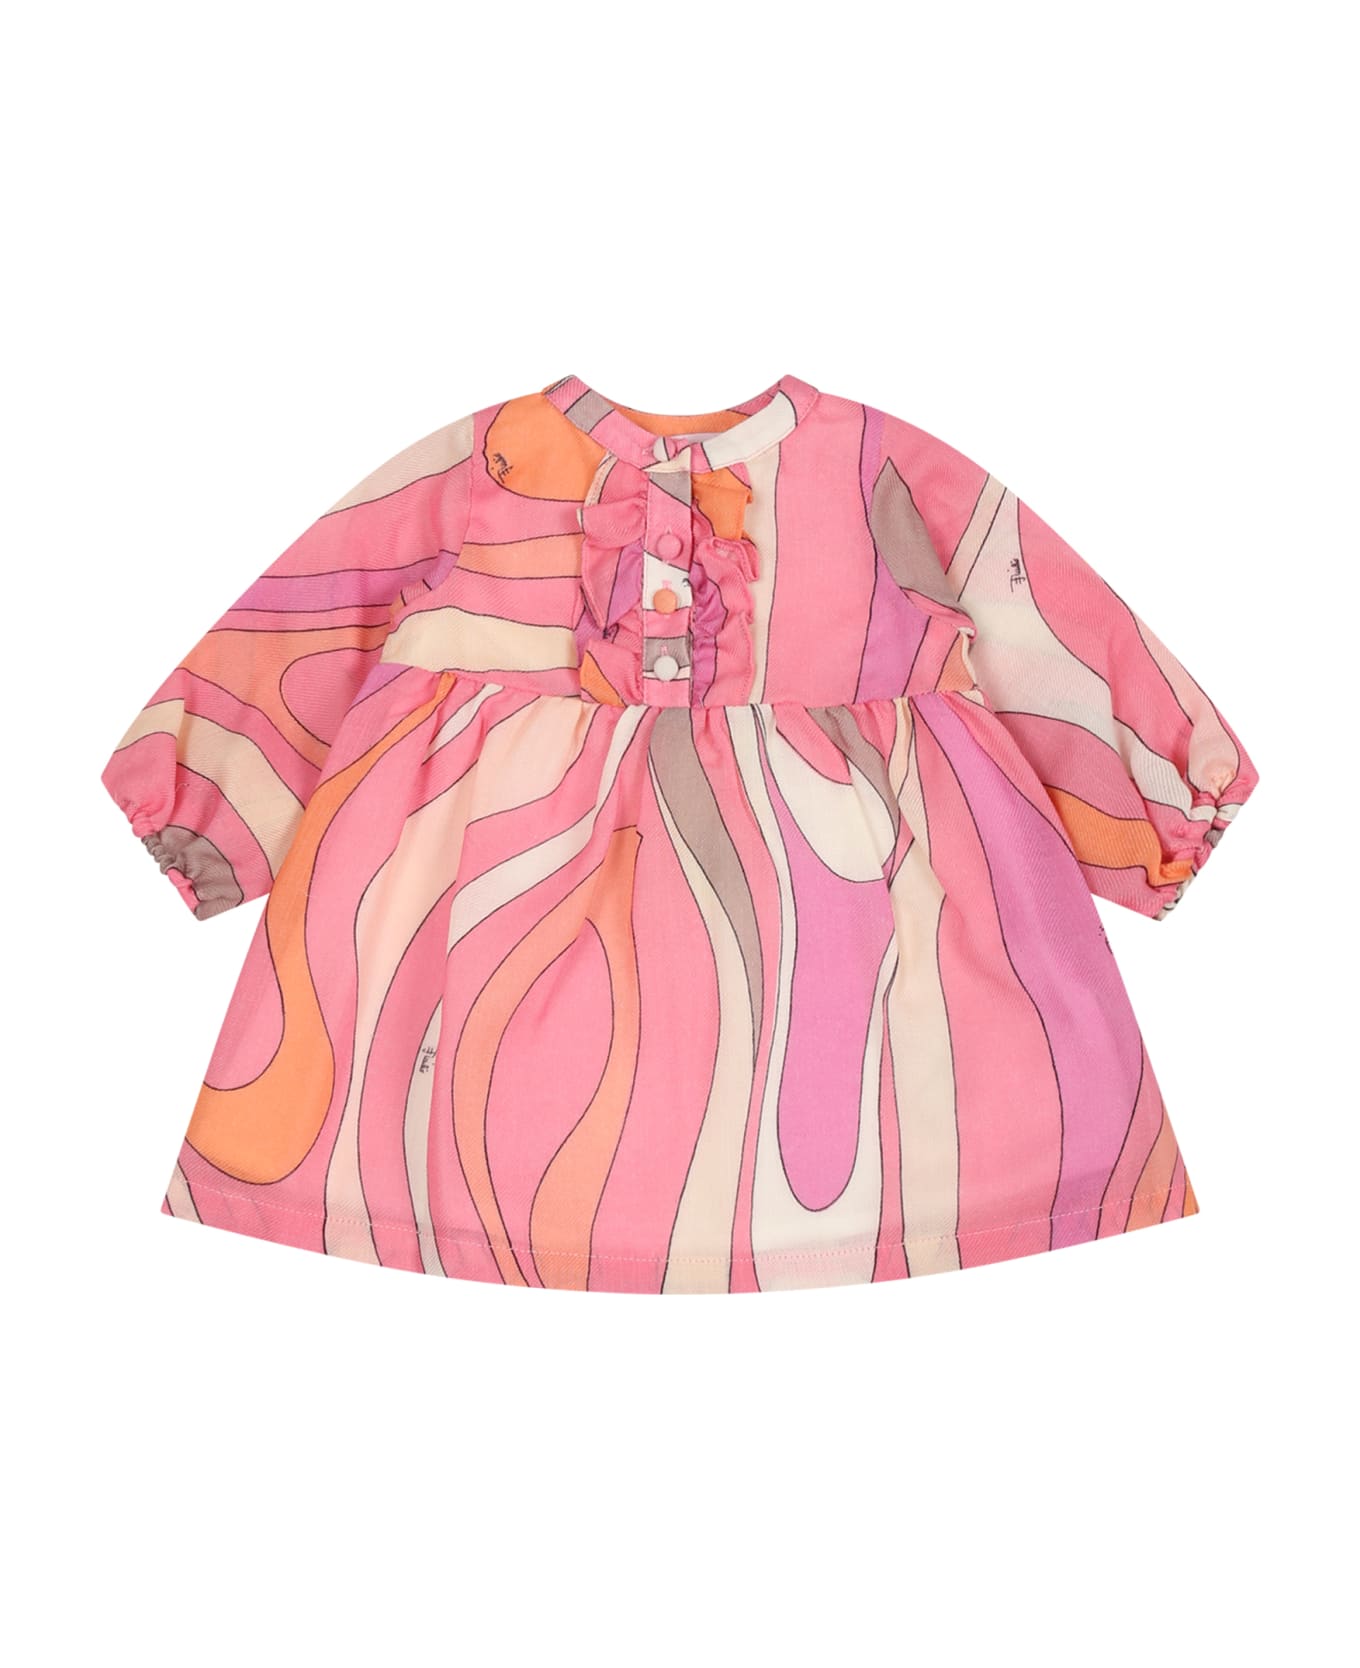 Pucci Pink Dress For Baby Girl With Logo - Multicolor